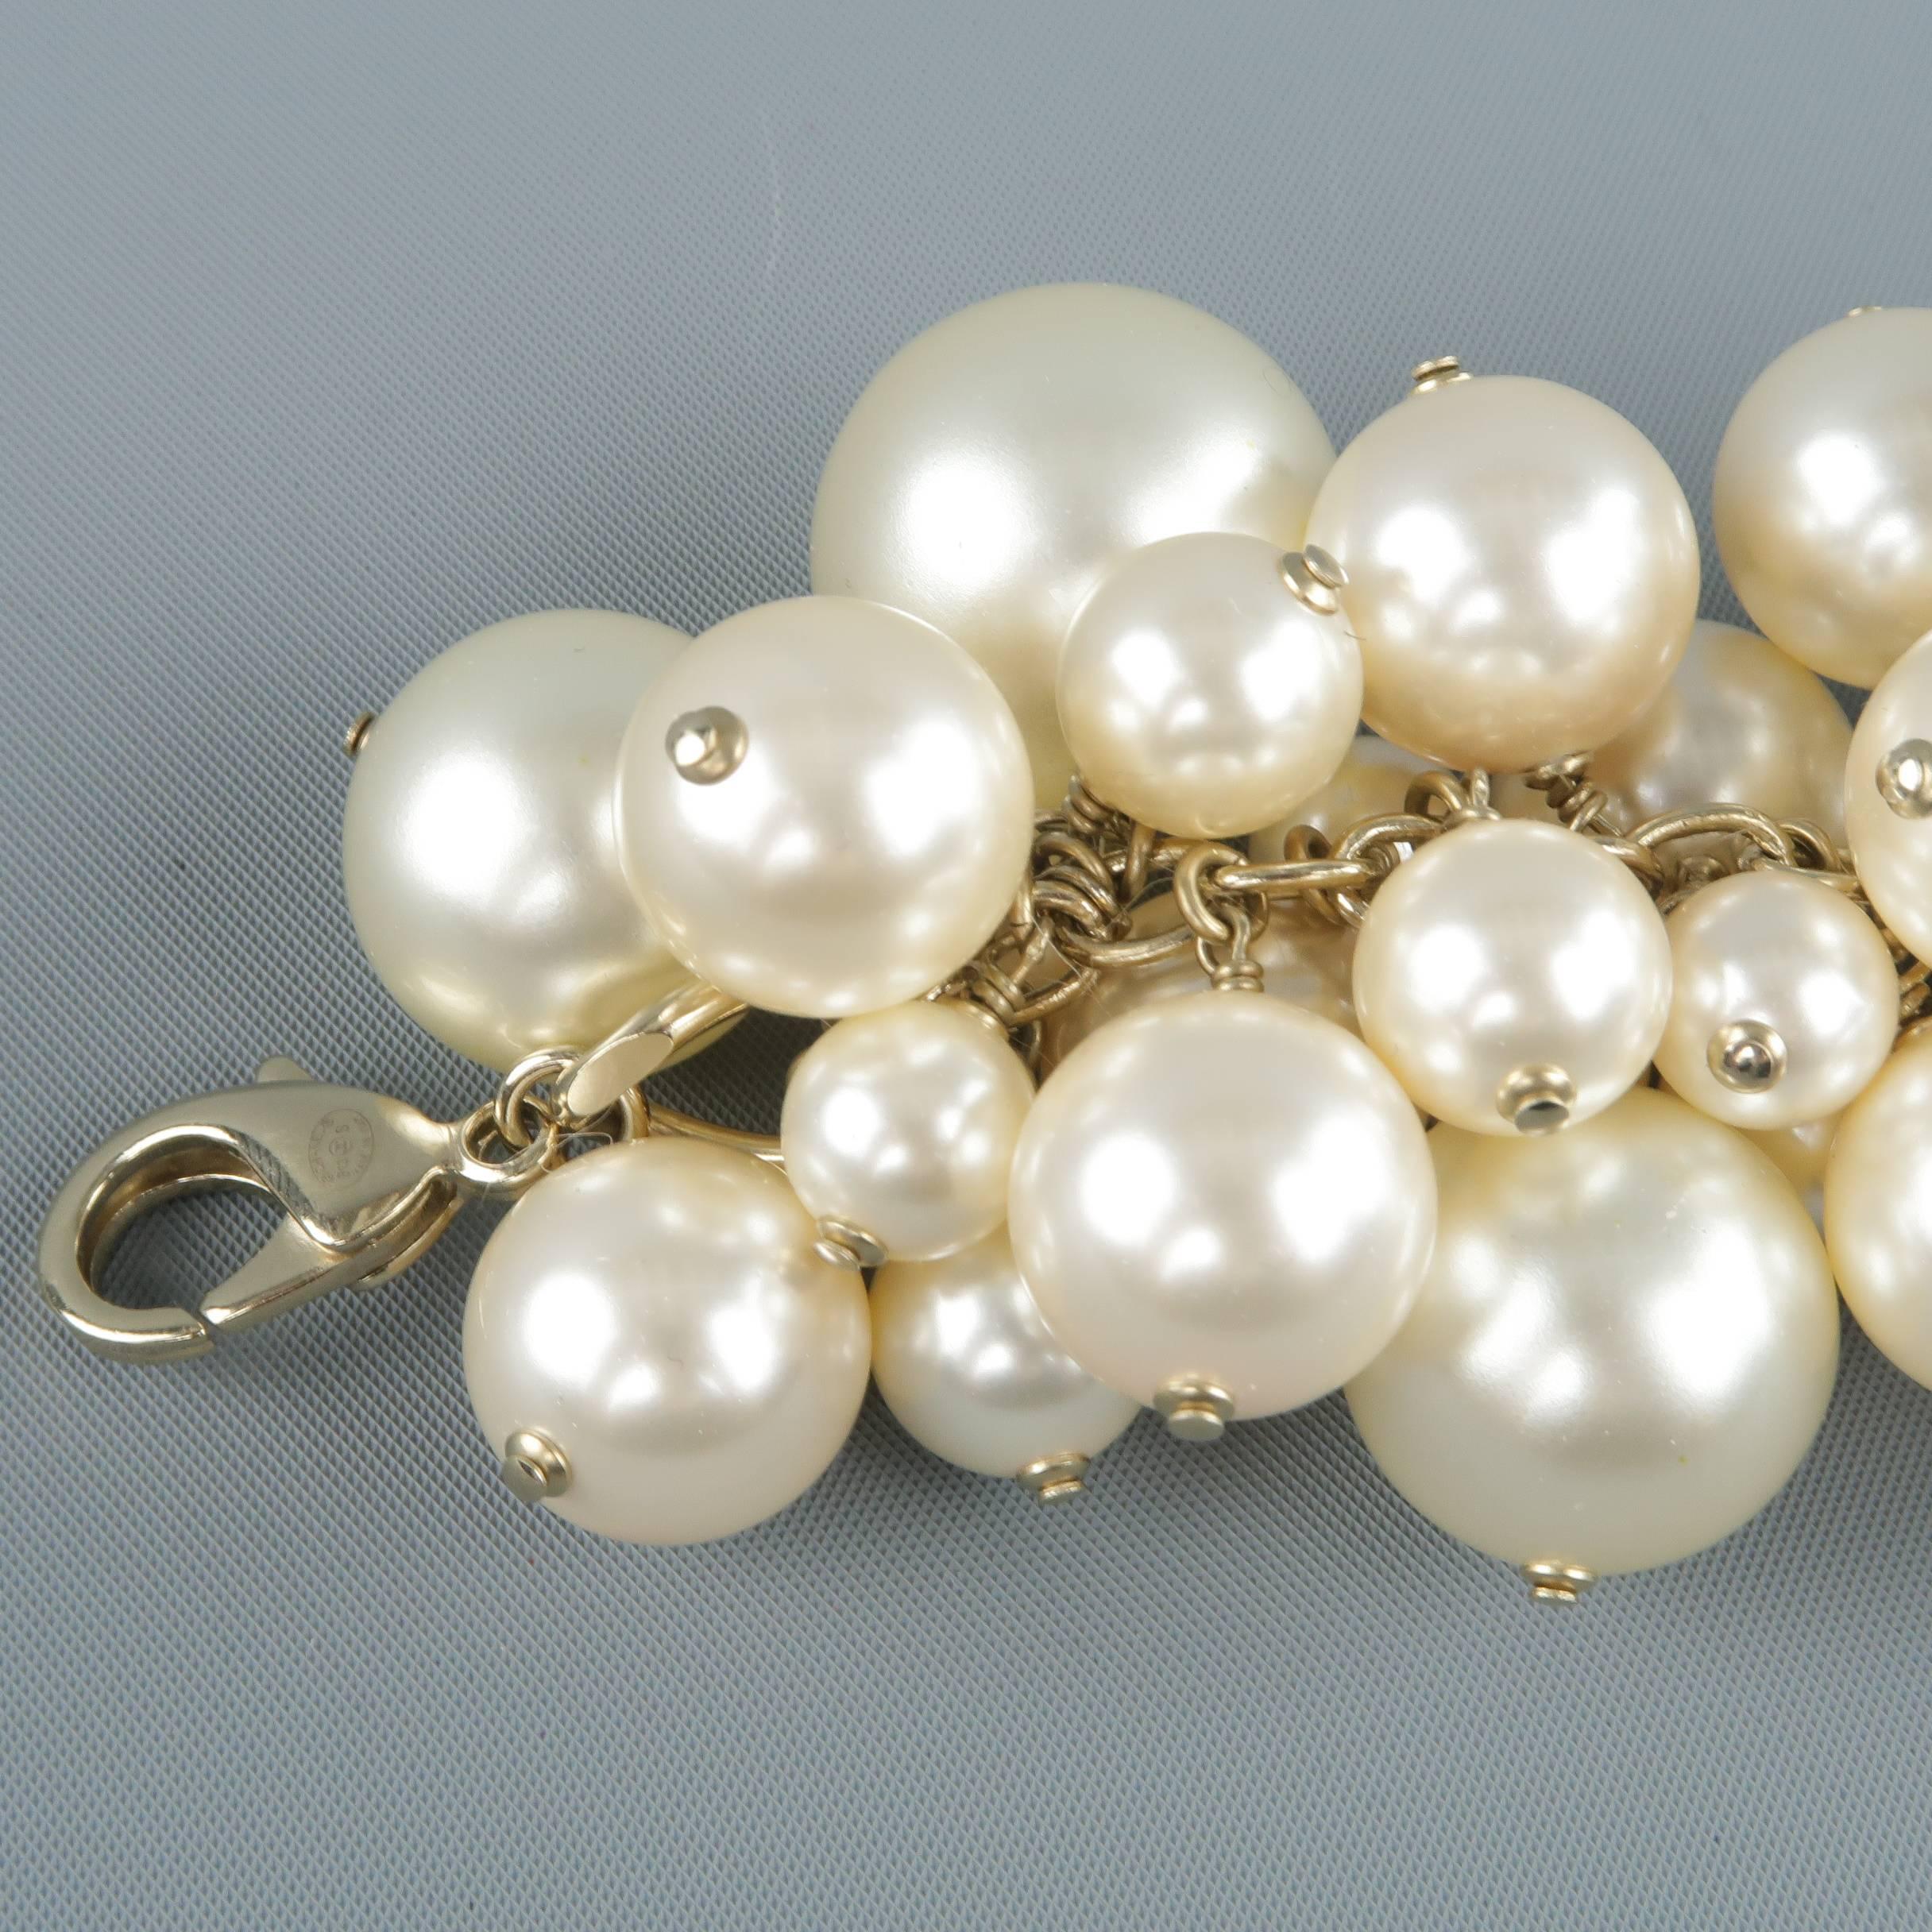 Chanel Cream and Light Gold Pearl Cluster Bracelet, Spring 2013   2